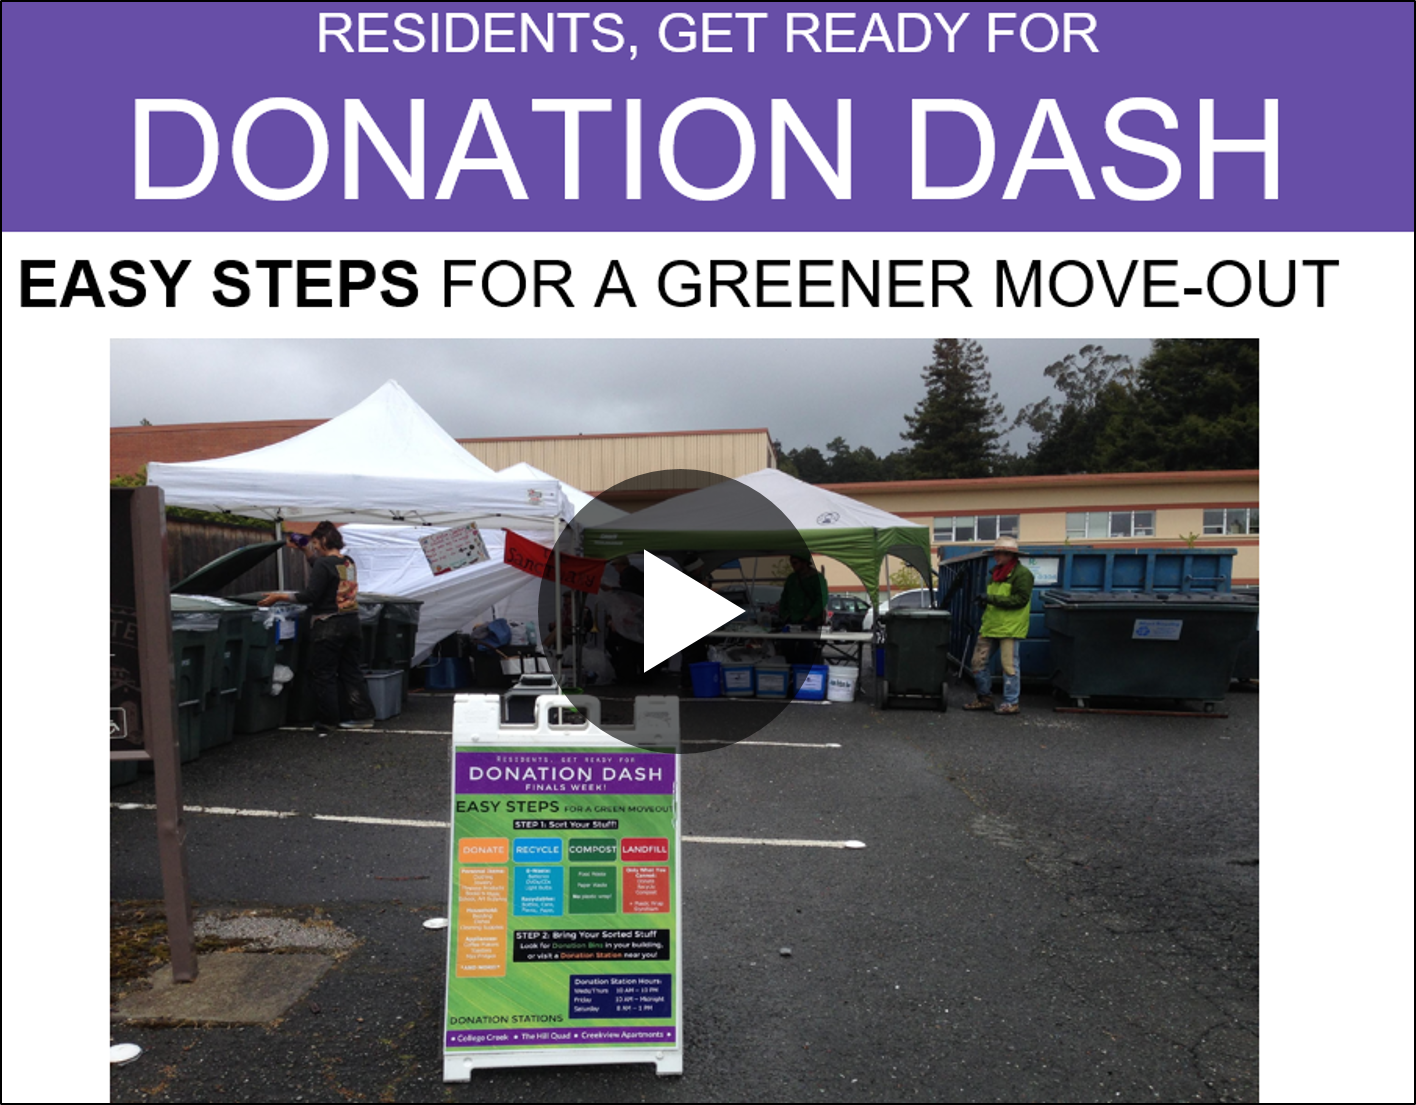 Click here to watch short video on Donation Dash